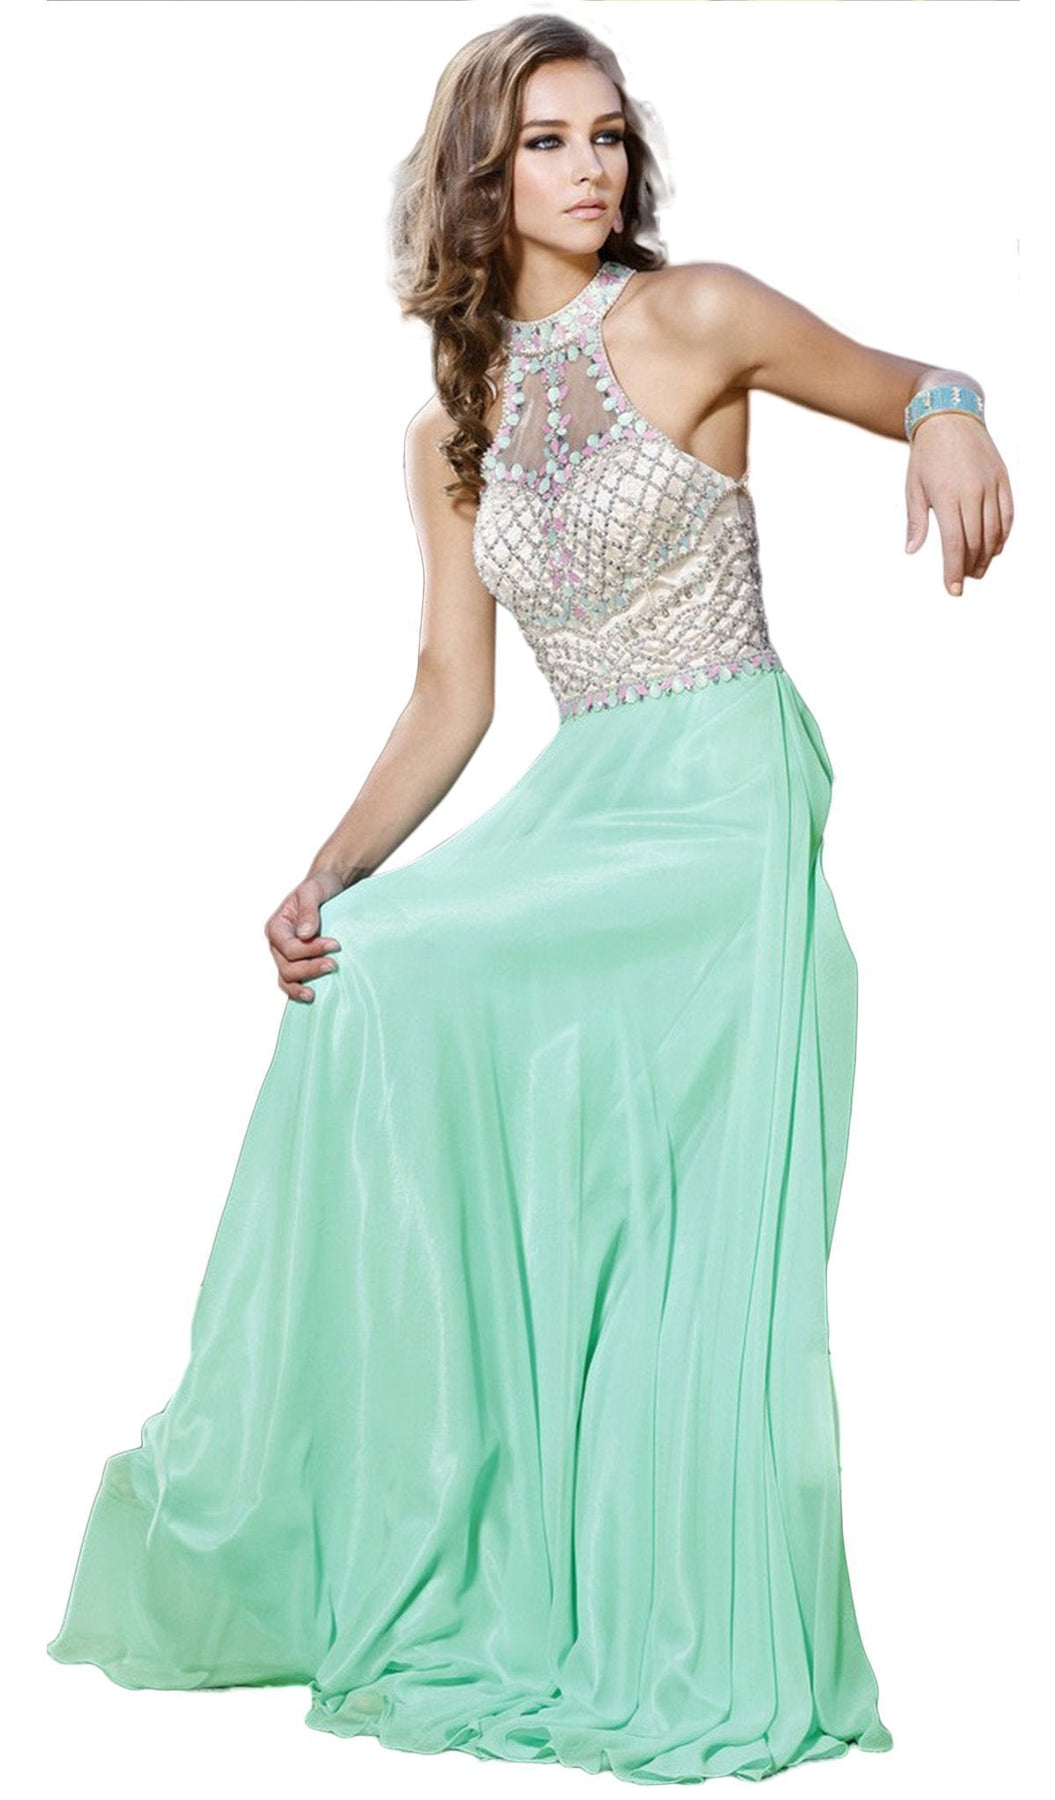 Nox Anabel - 8200 Bejeweled Halter Chiffon A-line Dress Special Occasion Dress XS / Mint Green